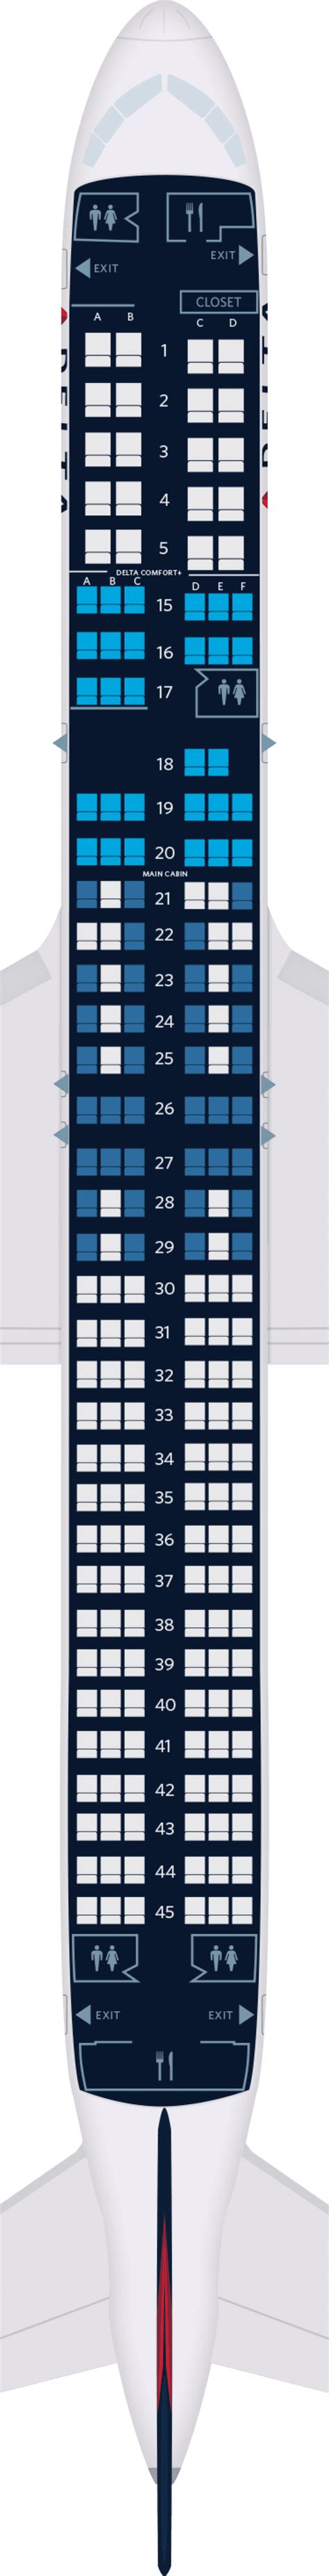 Delta Airplane Seating Chart My Xxx Hot Girl